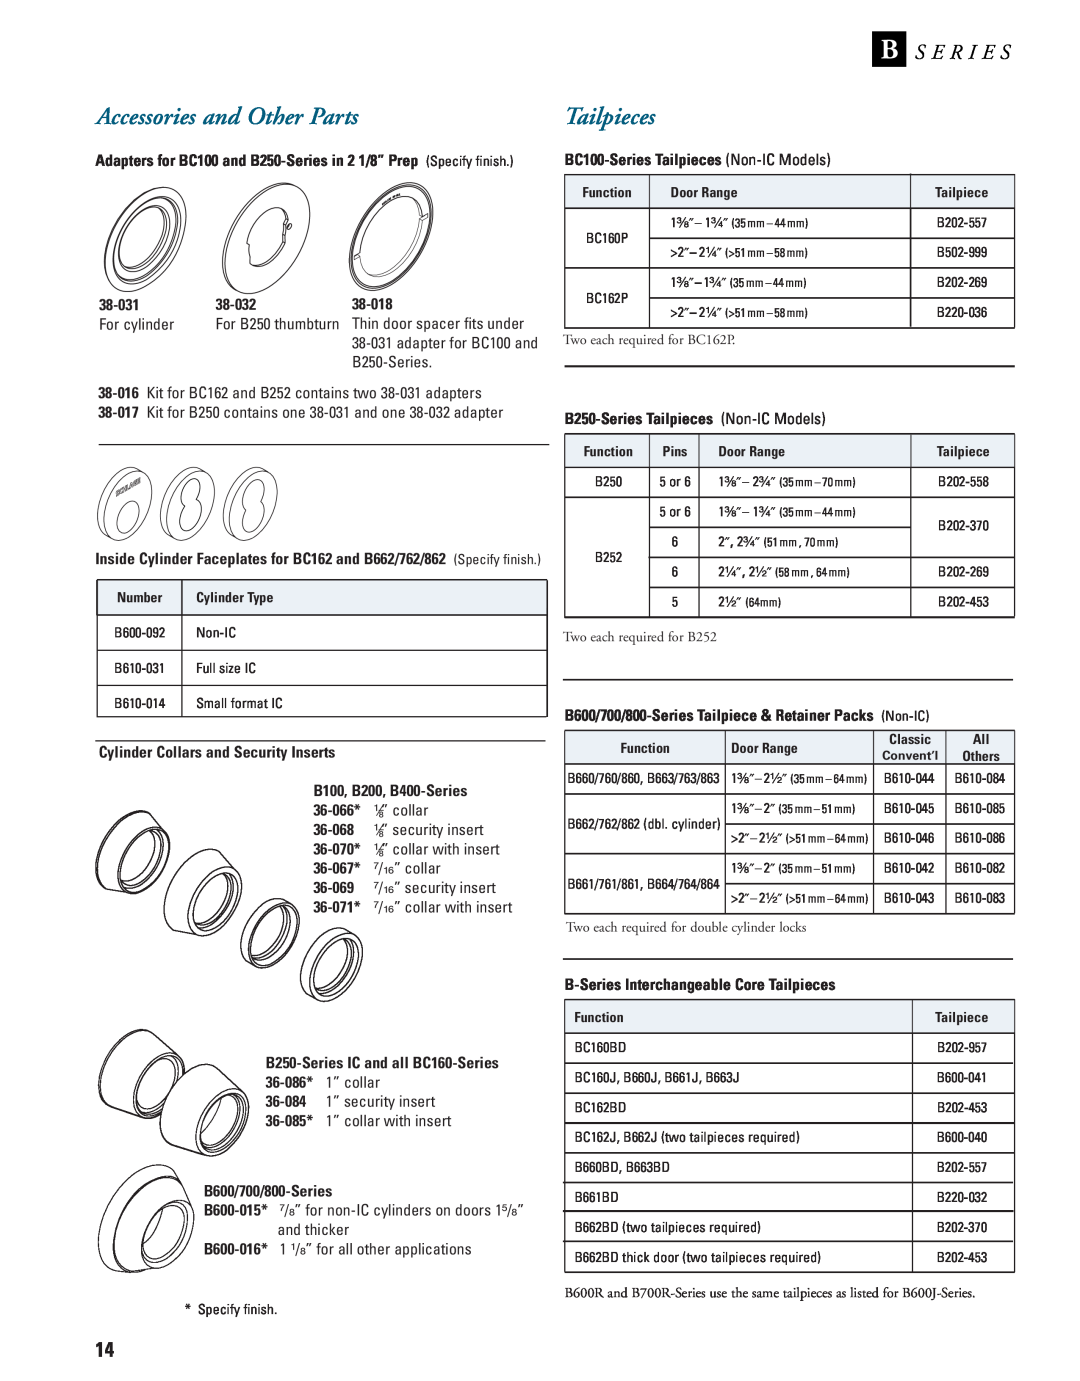 Schlage B-Series manual Accessories and Other Parts, S E R I E S, Tailpieces 